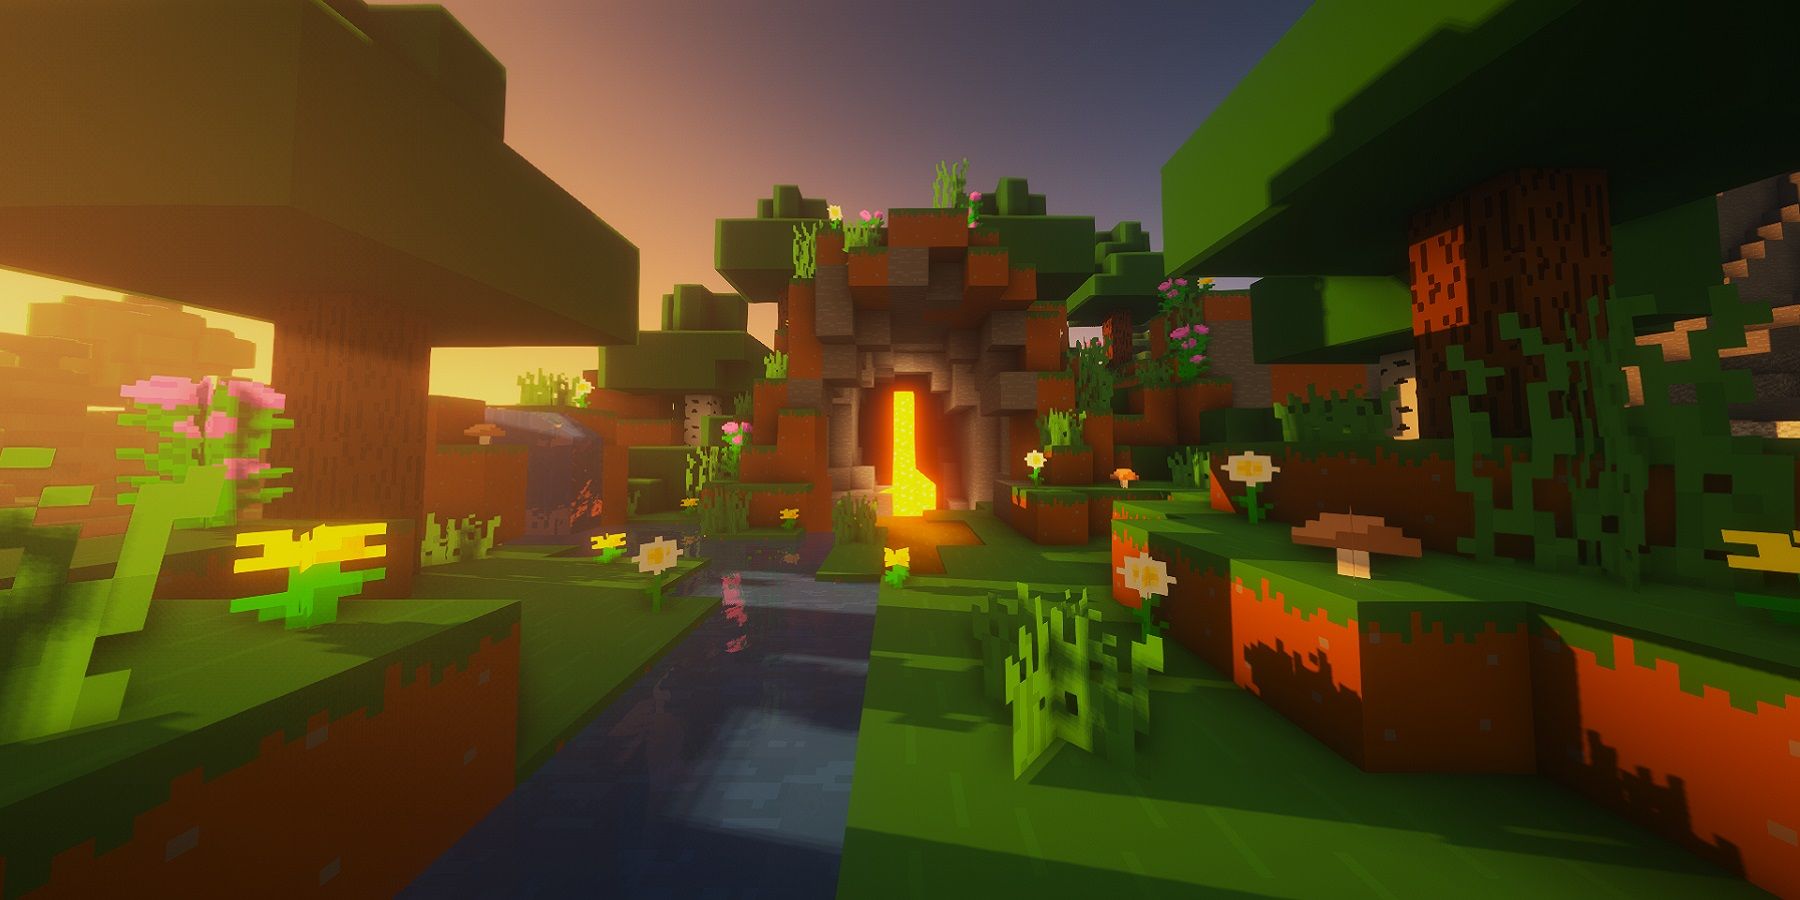 An image from Minecraft showing the laval-filled cave as seen in the game's official launcher.